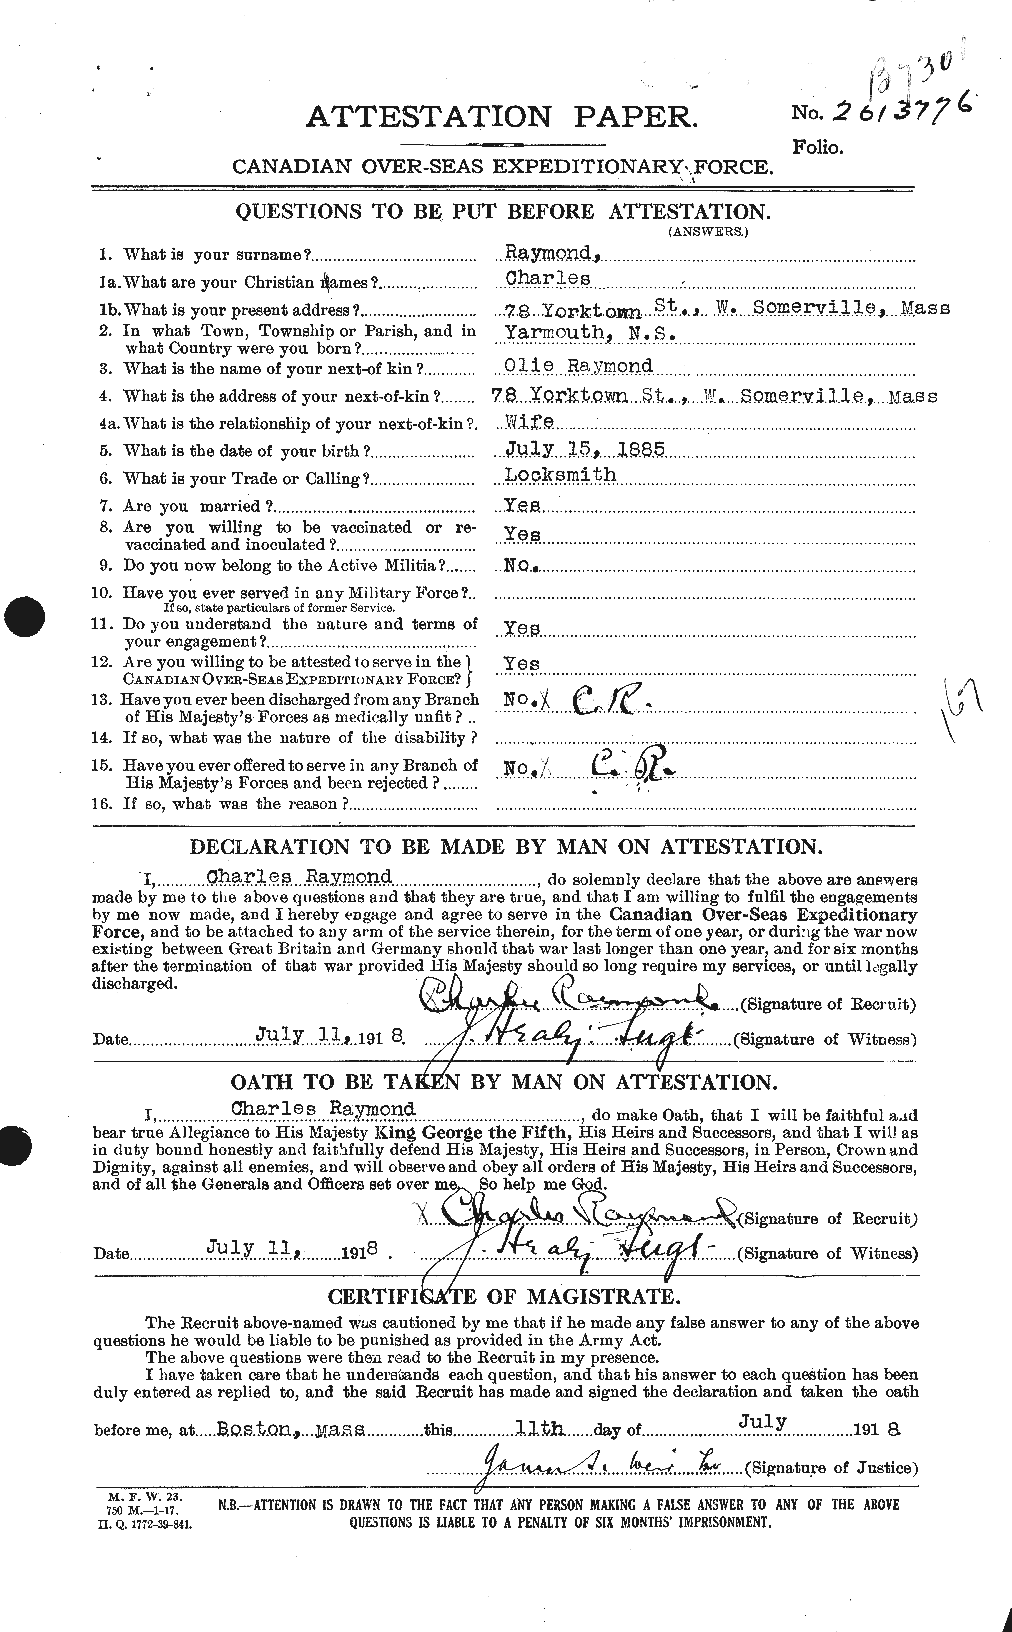 Personnel Records of the First World War - CEF 595269a